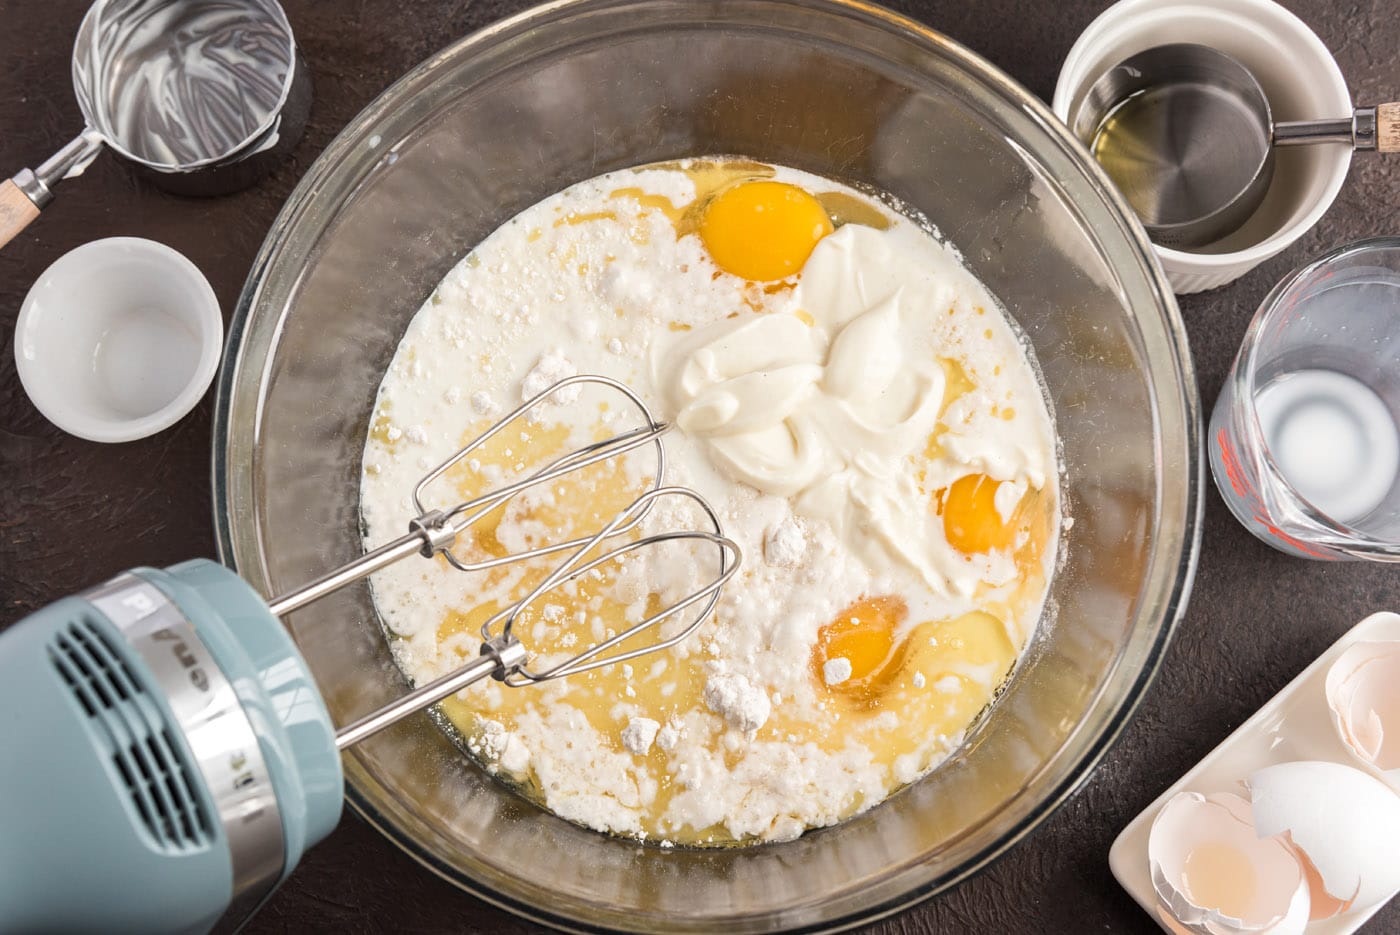 cake mix ingredients with yogurt and milk in a bowl with a mixer